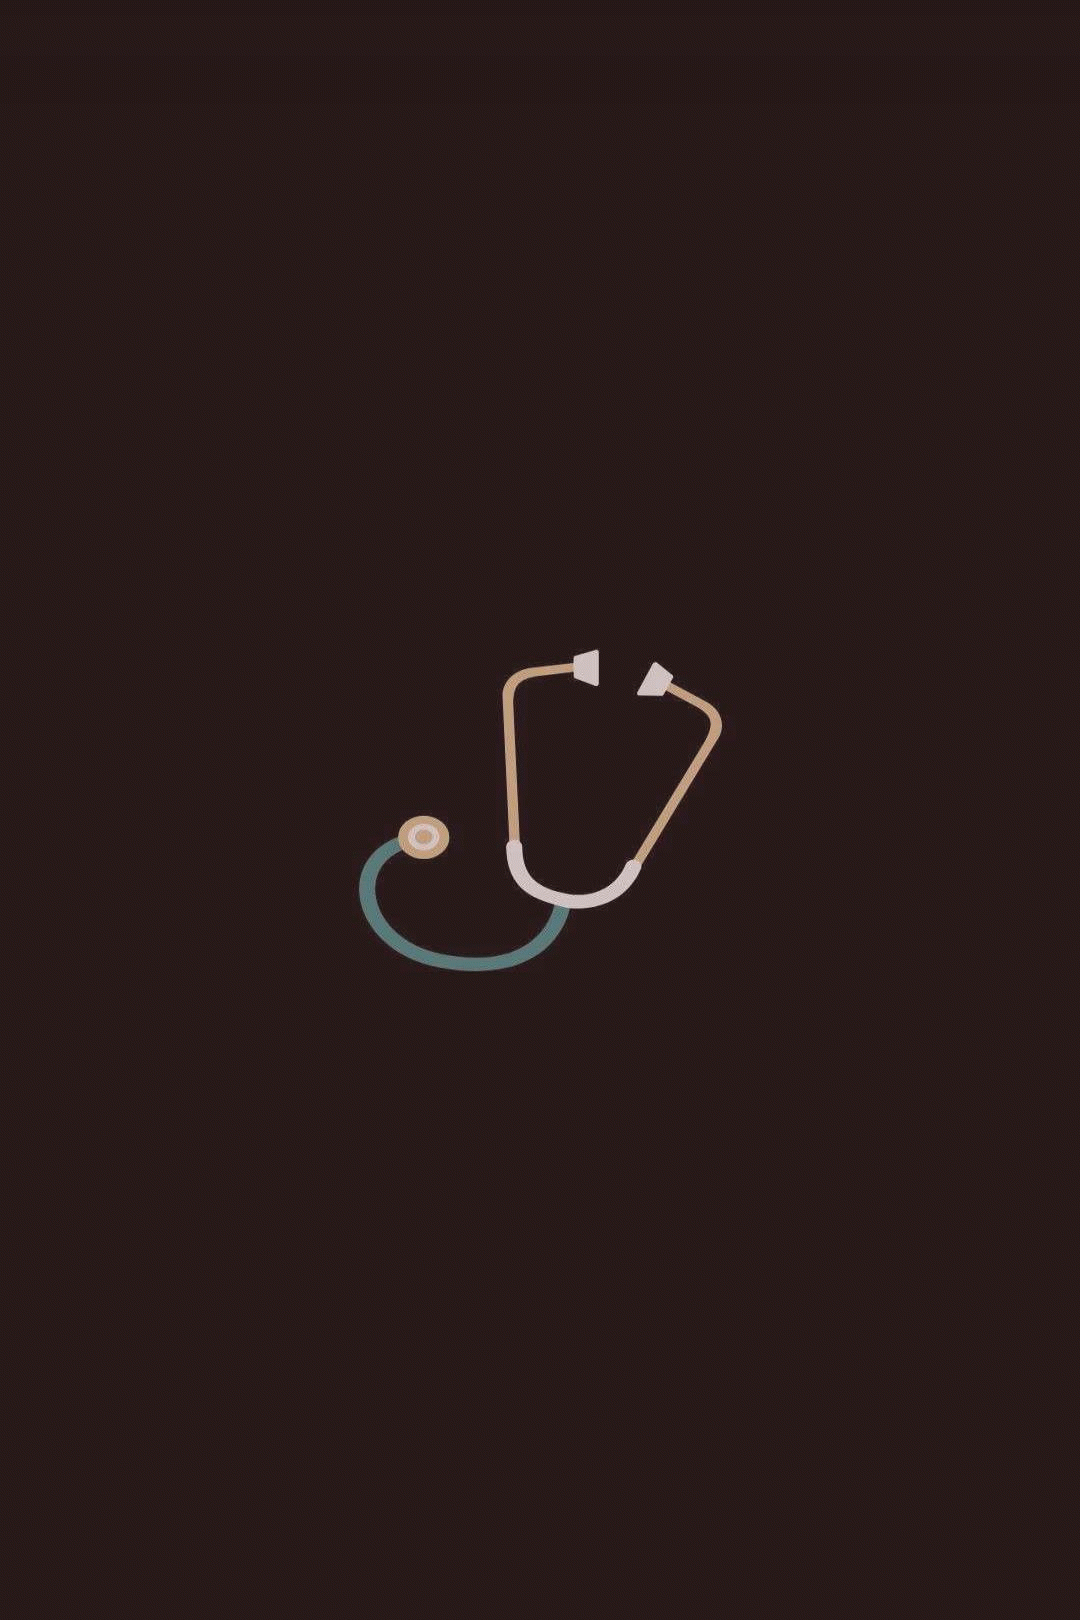 Cute Stethoscope Wallpapers - Top Free Cute Stethoscope Backgrounds ...